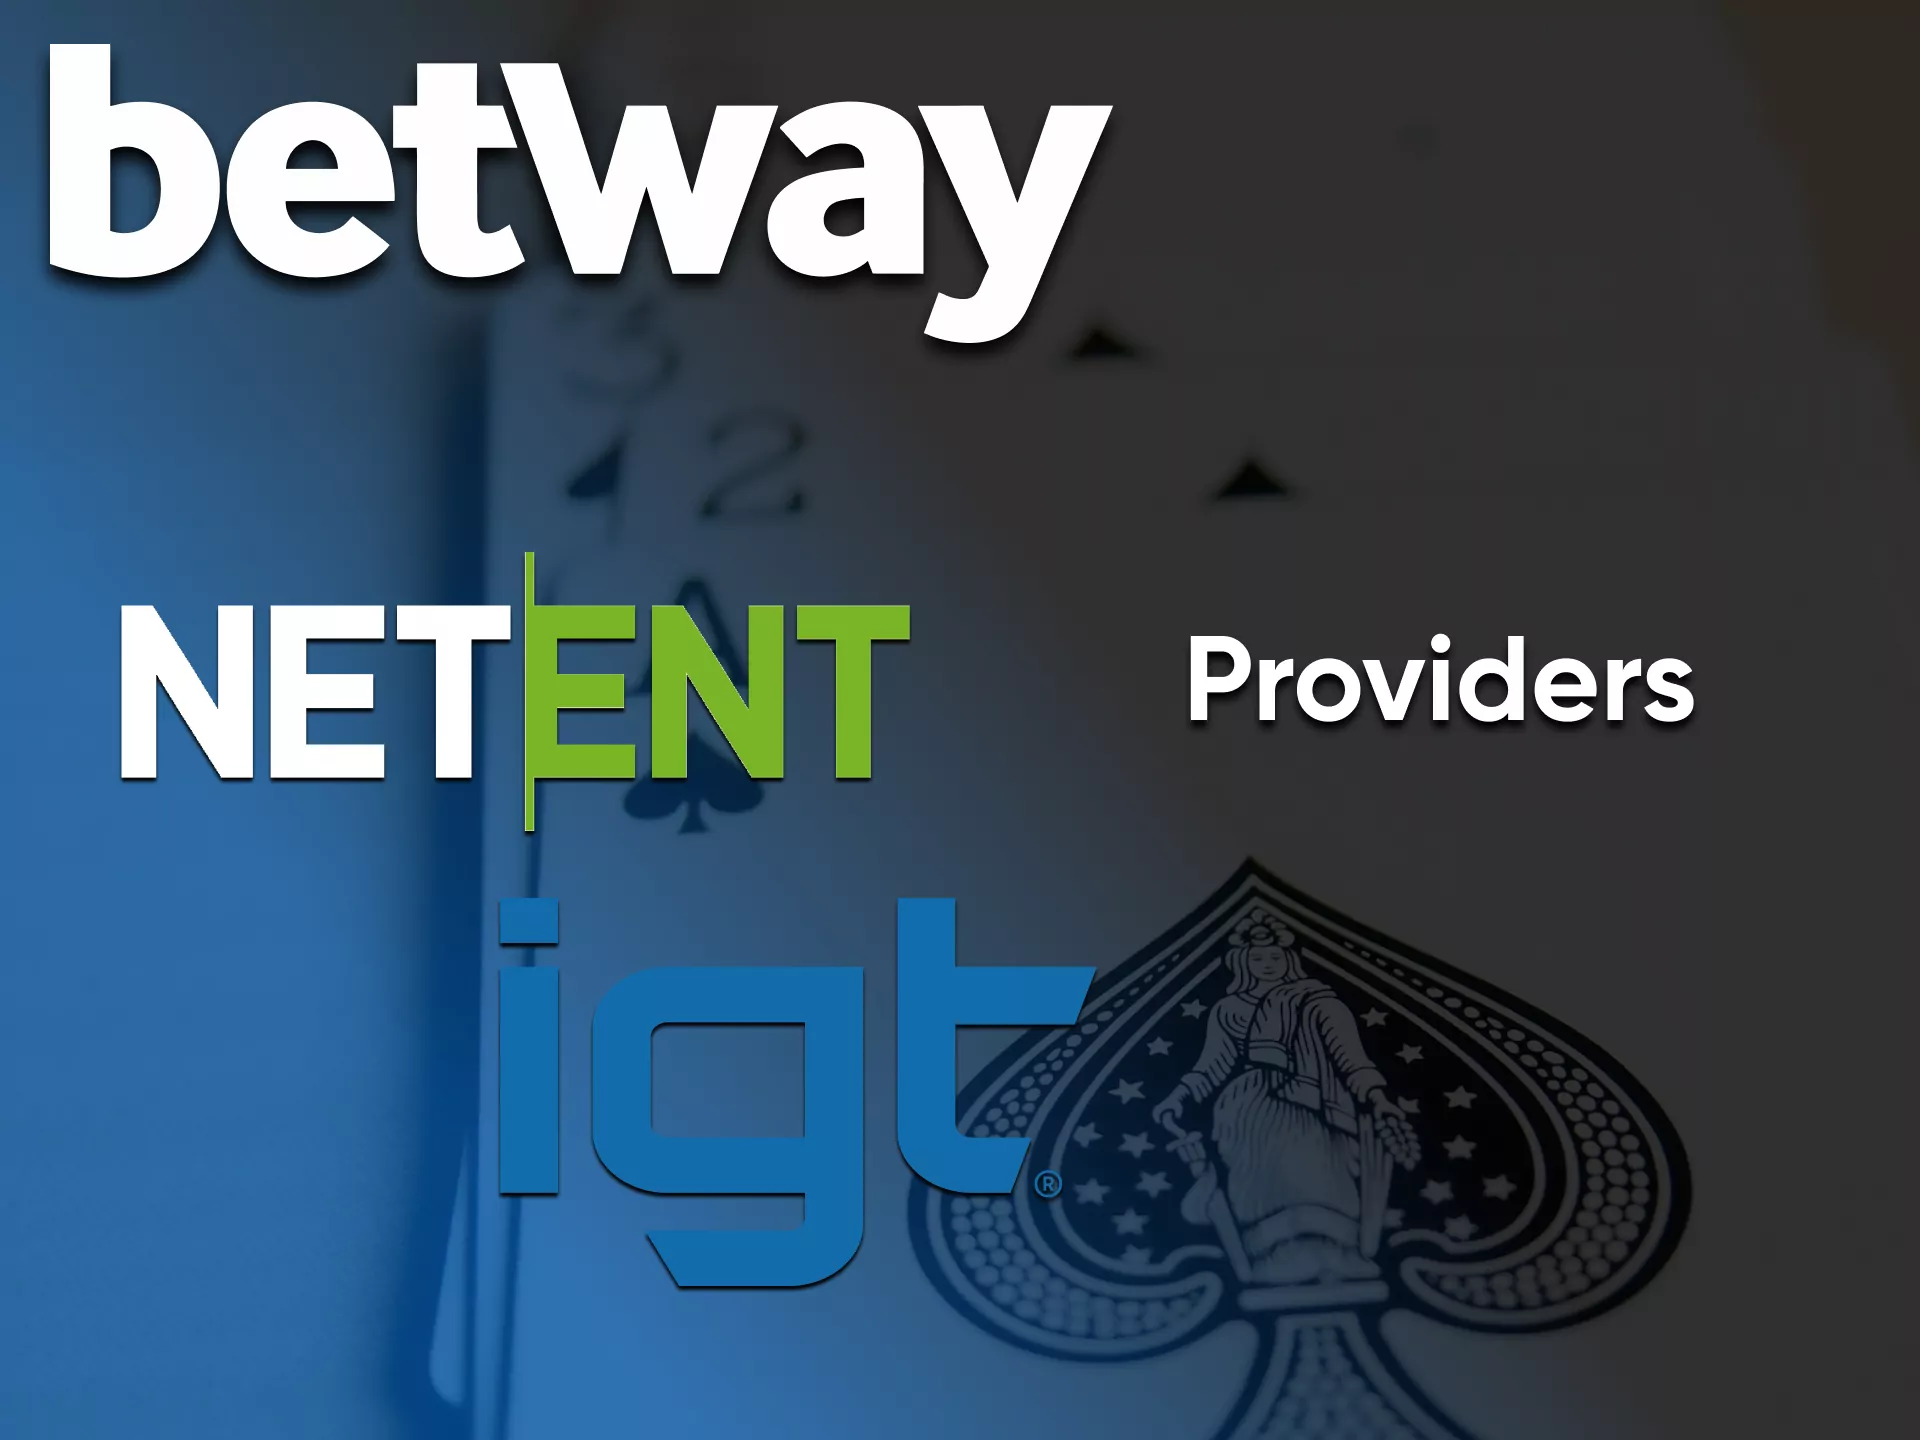 Choose the best provider for the Betway casino game.